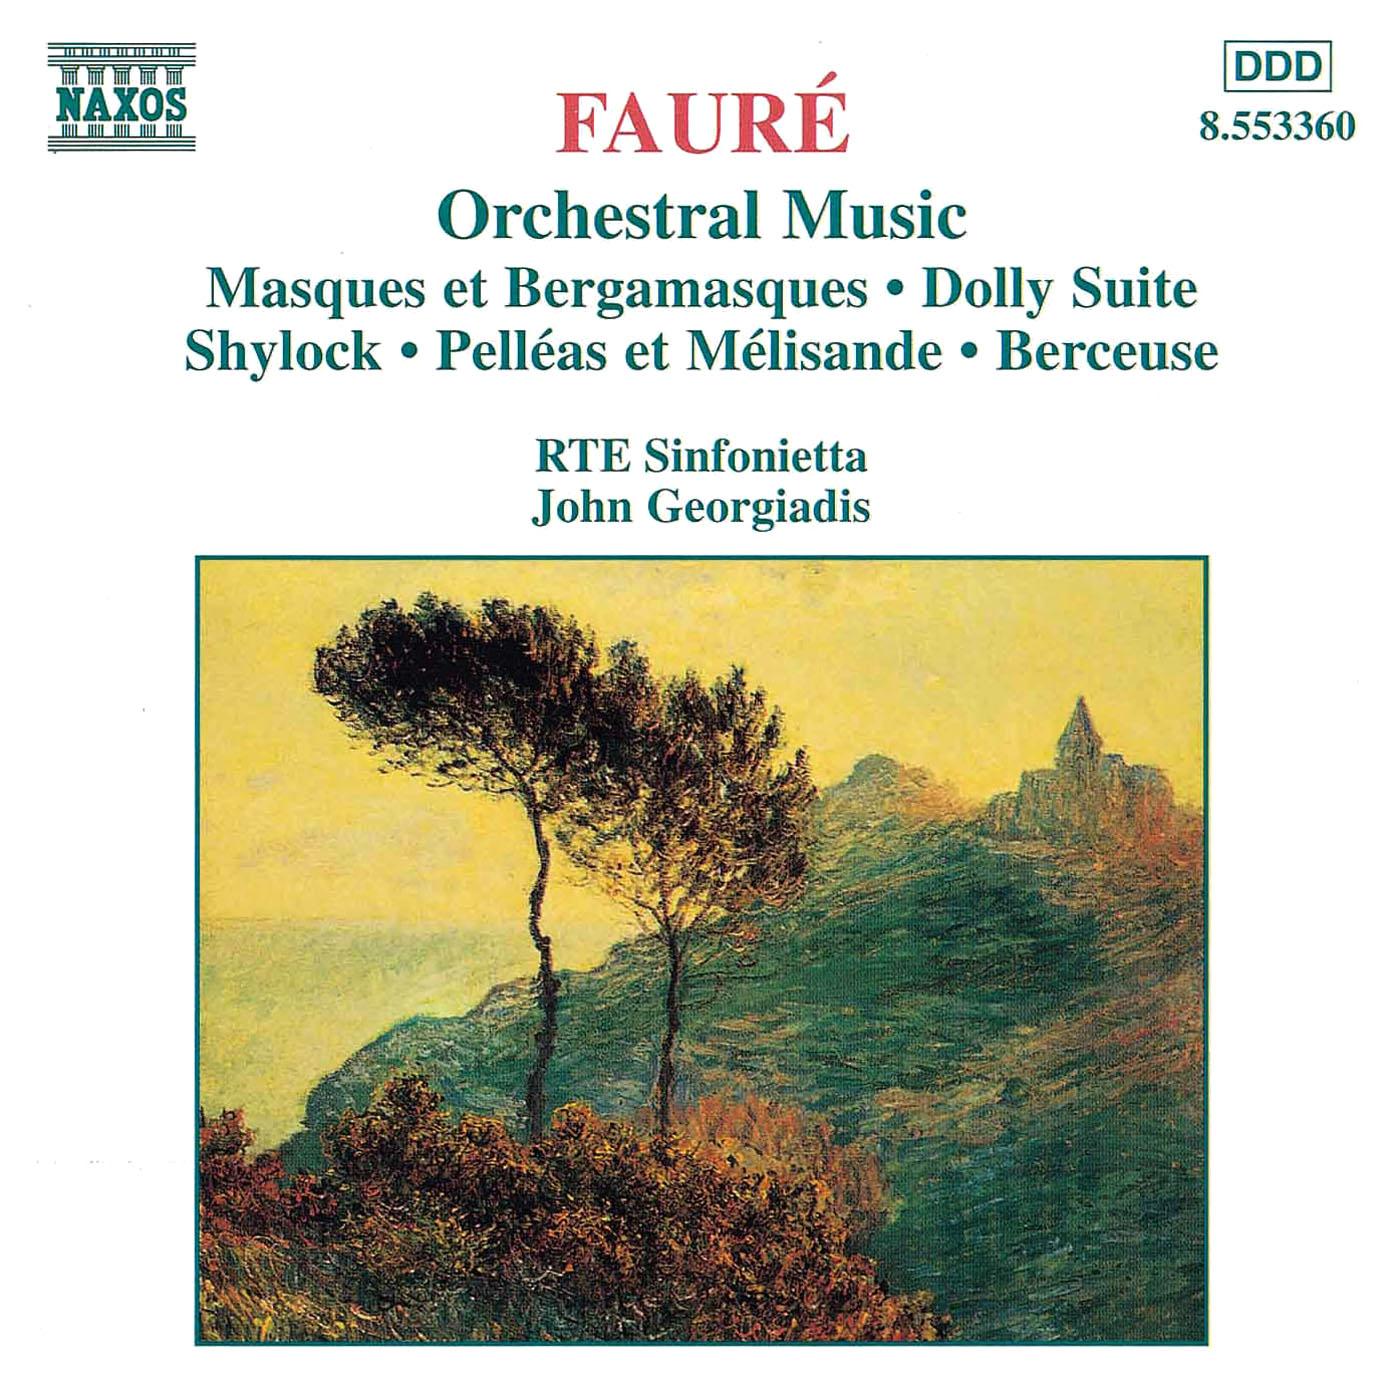 FAURE: Orchestral Music